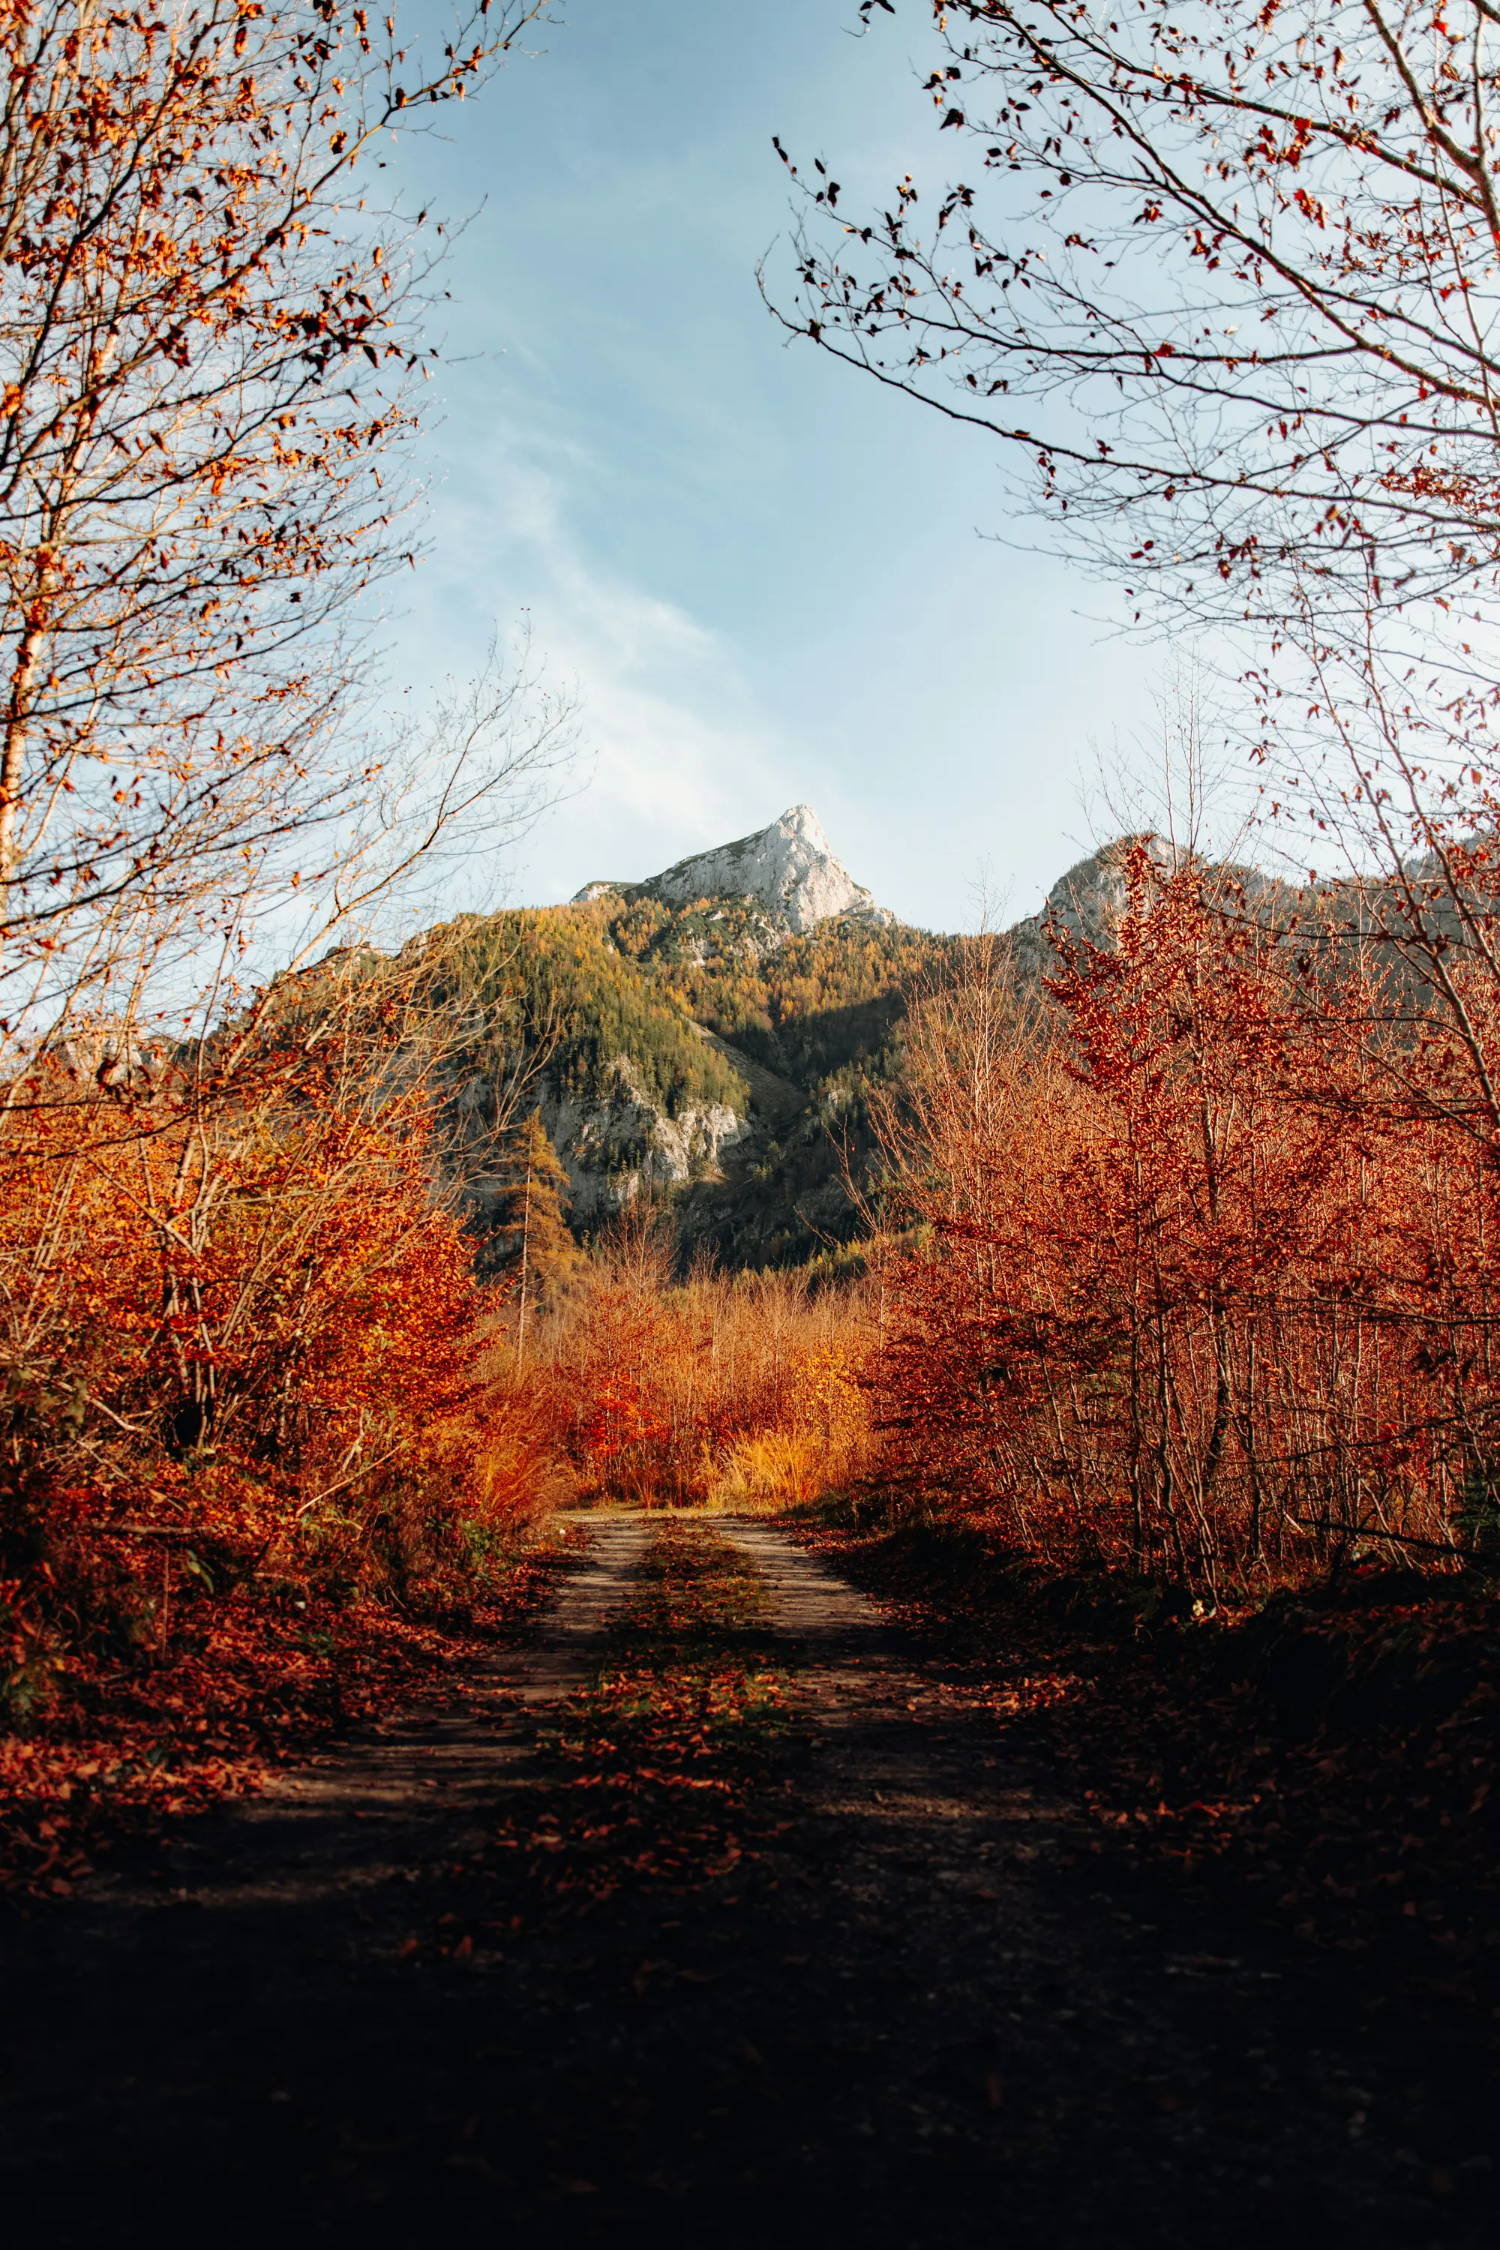 A path lined with autumn leaves leading to a mountain